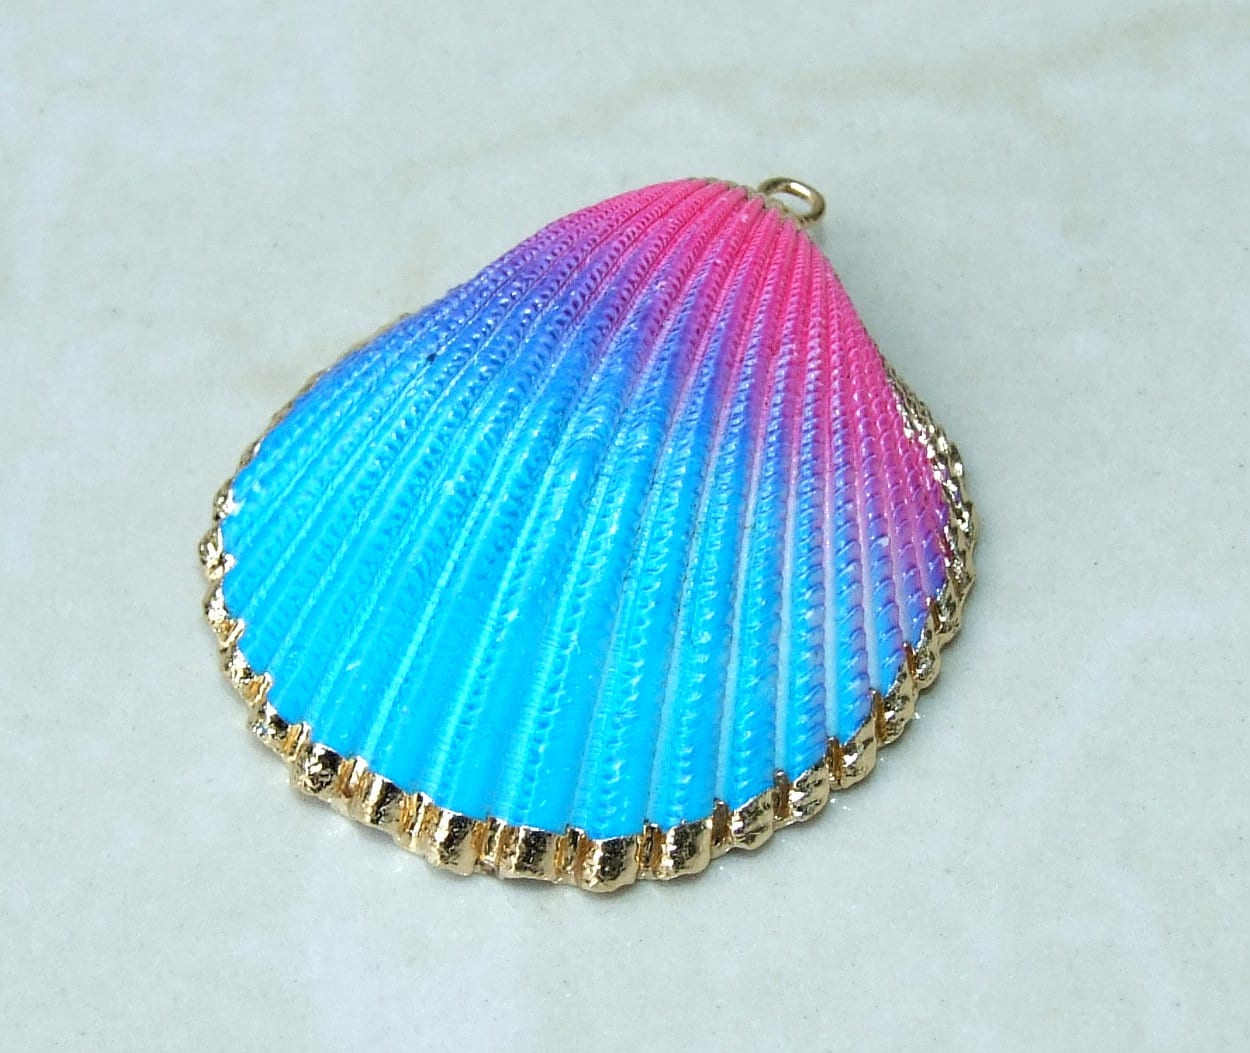 Hand Painted Natural Sea Shell Pendant, Seashell Bead, Shell Pendant, Charm, Clam Shell, Shell Jewelry, Pink and Blue - 35-40mm - 04A